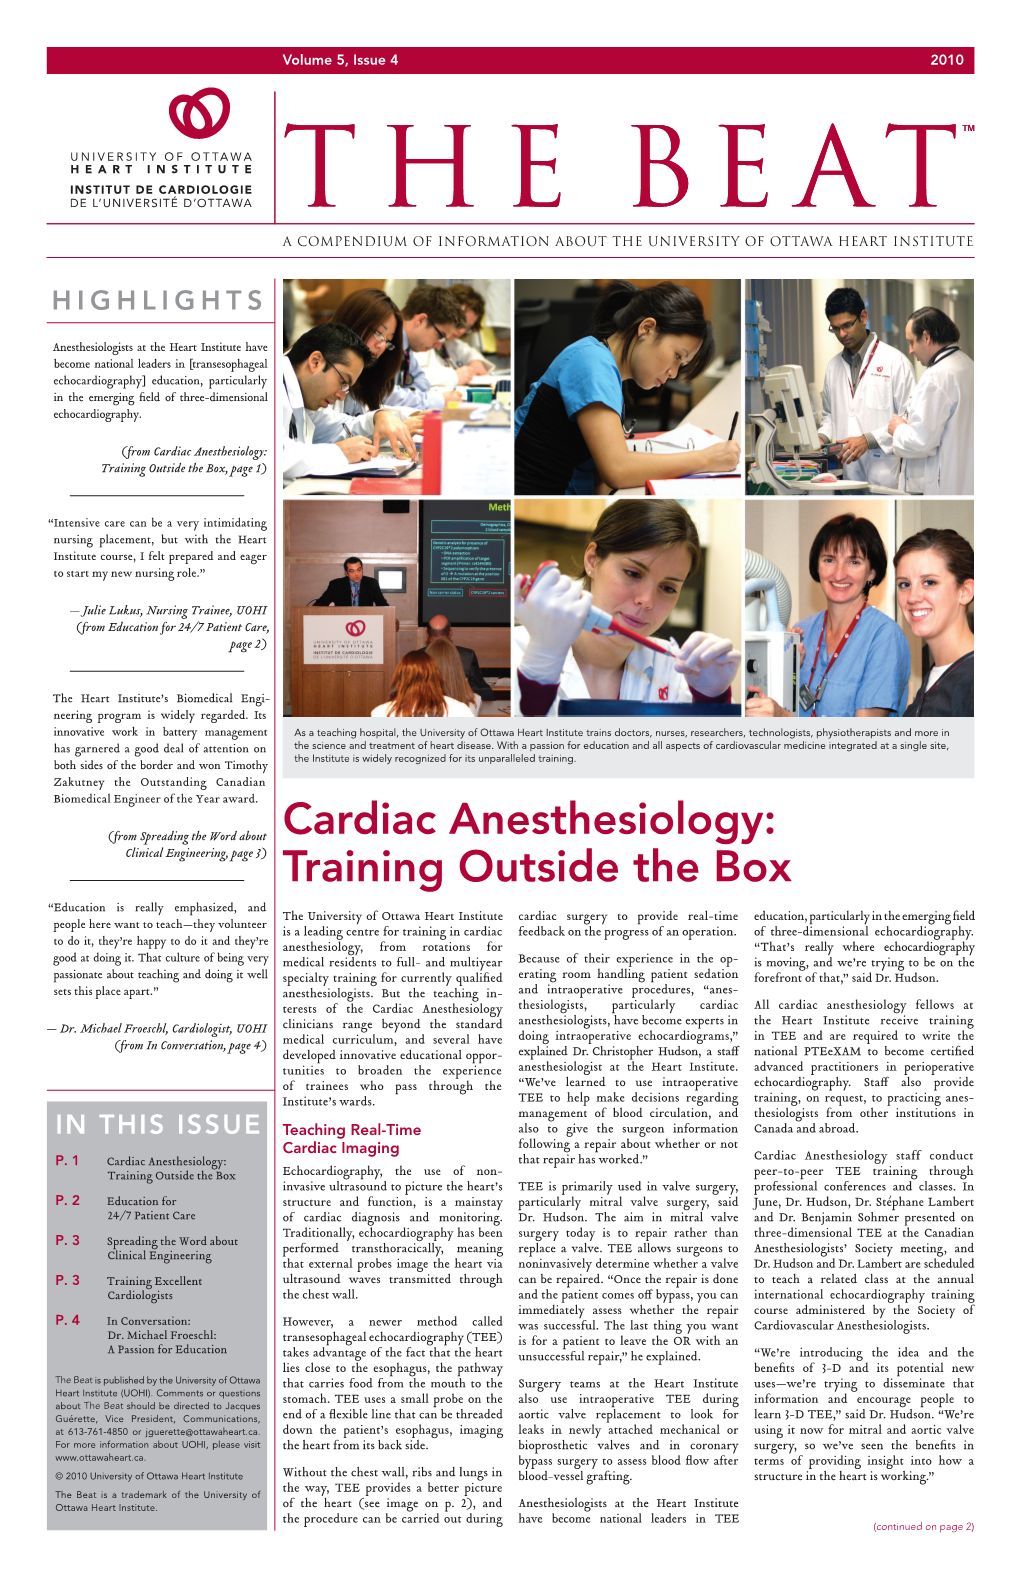 Cardiac Anesthesiology: Training Outside the Box, Page 1)